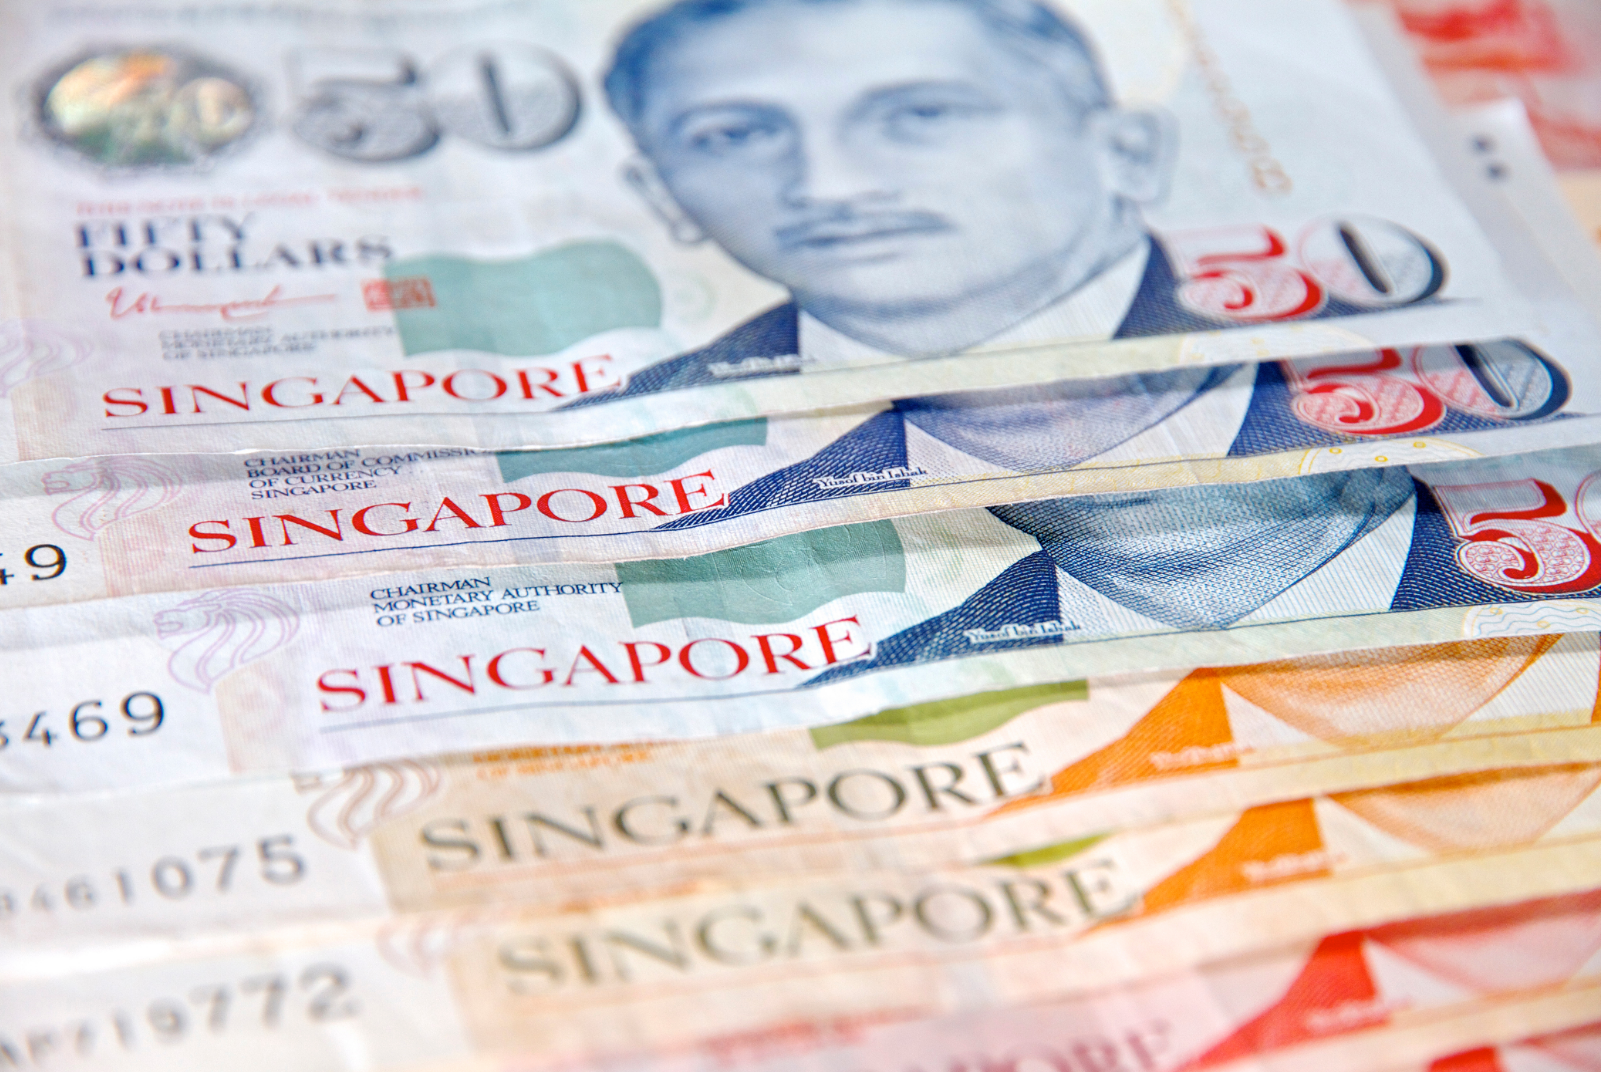 Singapore’s health care expenditure is expected to significantly increase by 2030 due to population ageing